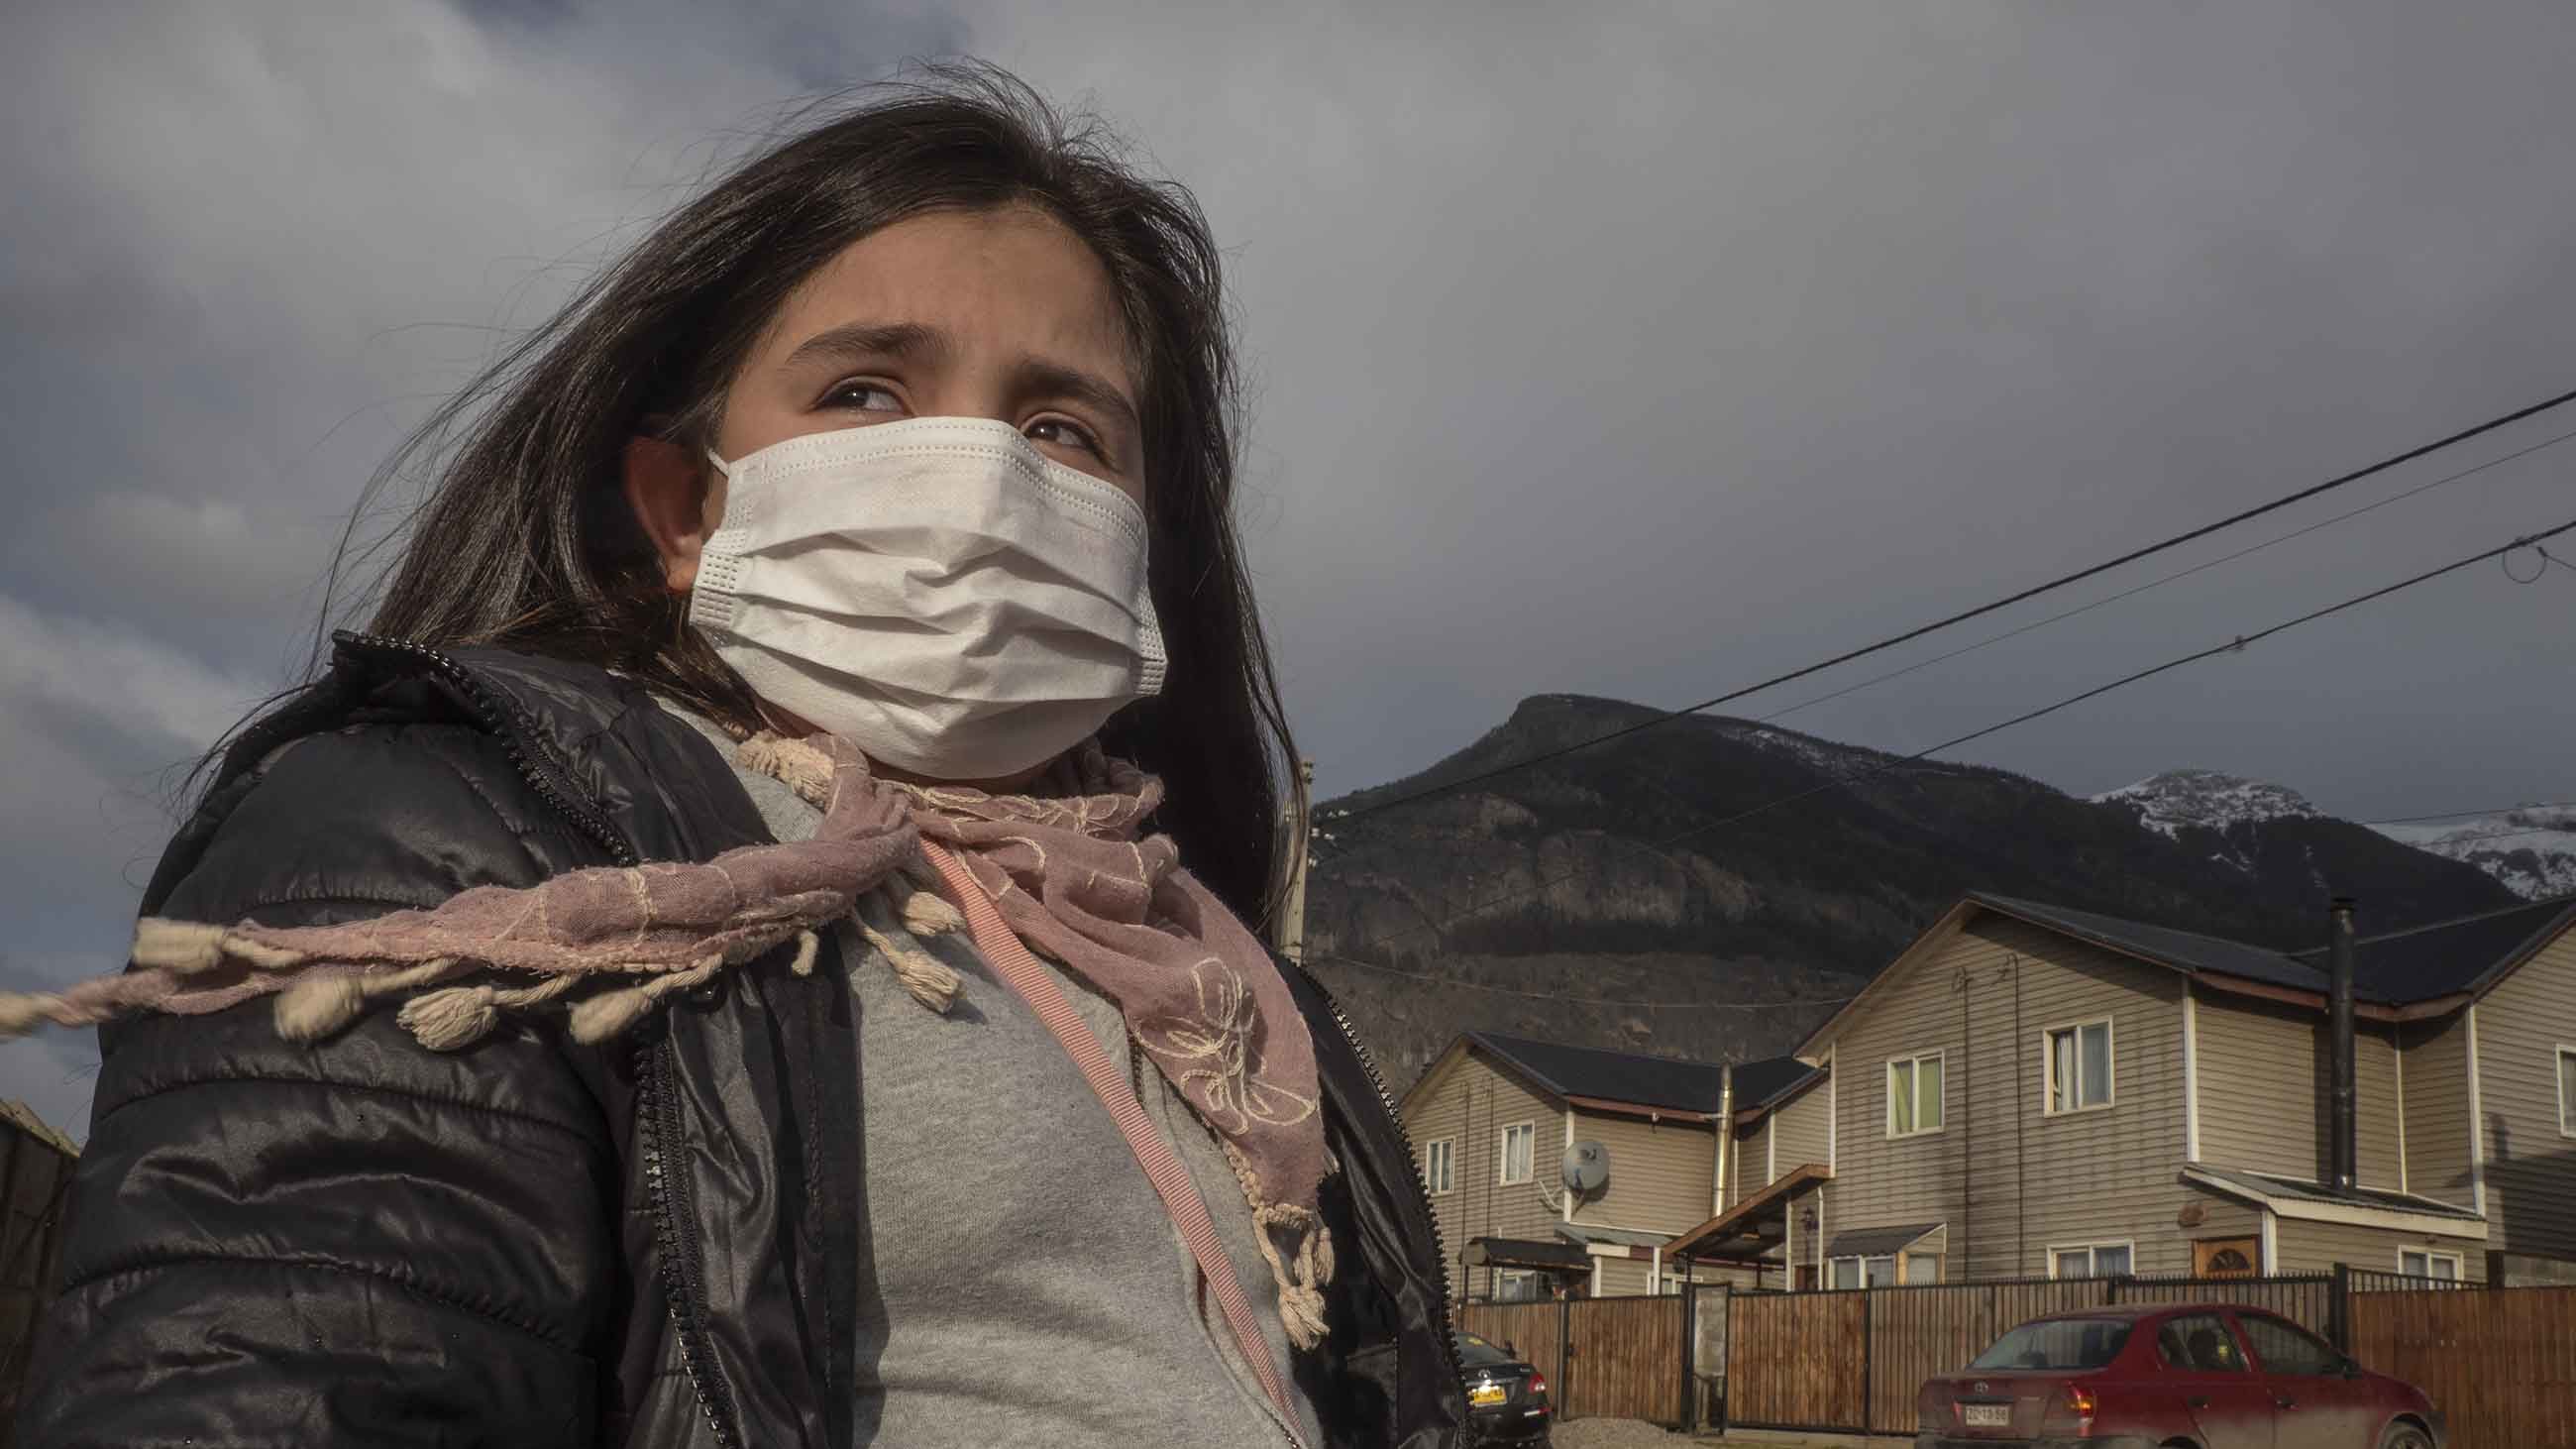 Natalie Galindo, 10, has severe asthma and most trips outside her home in the town of Coyhaique involve wearing a mask — or even a respirator.